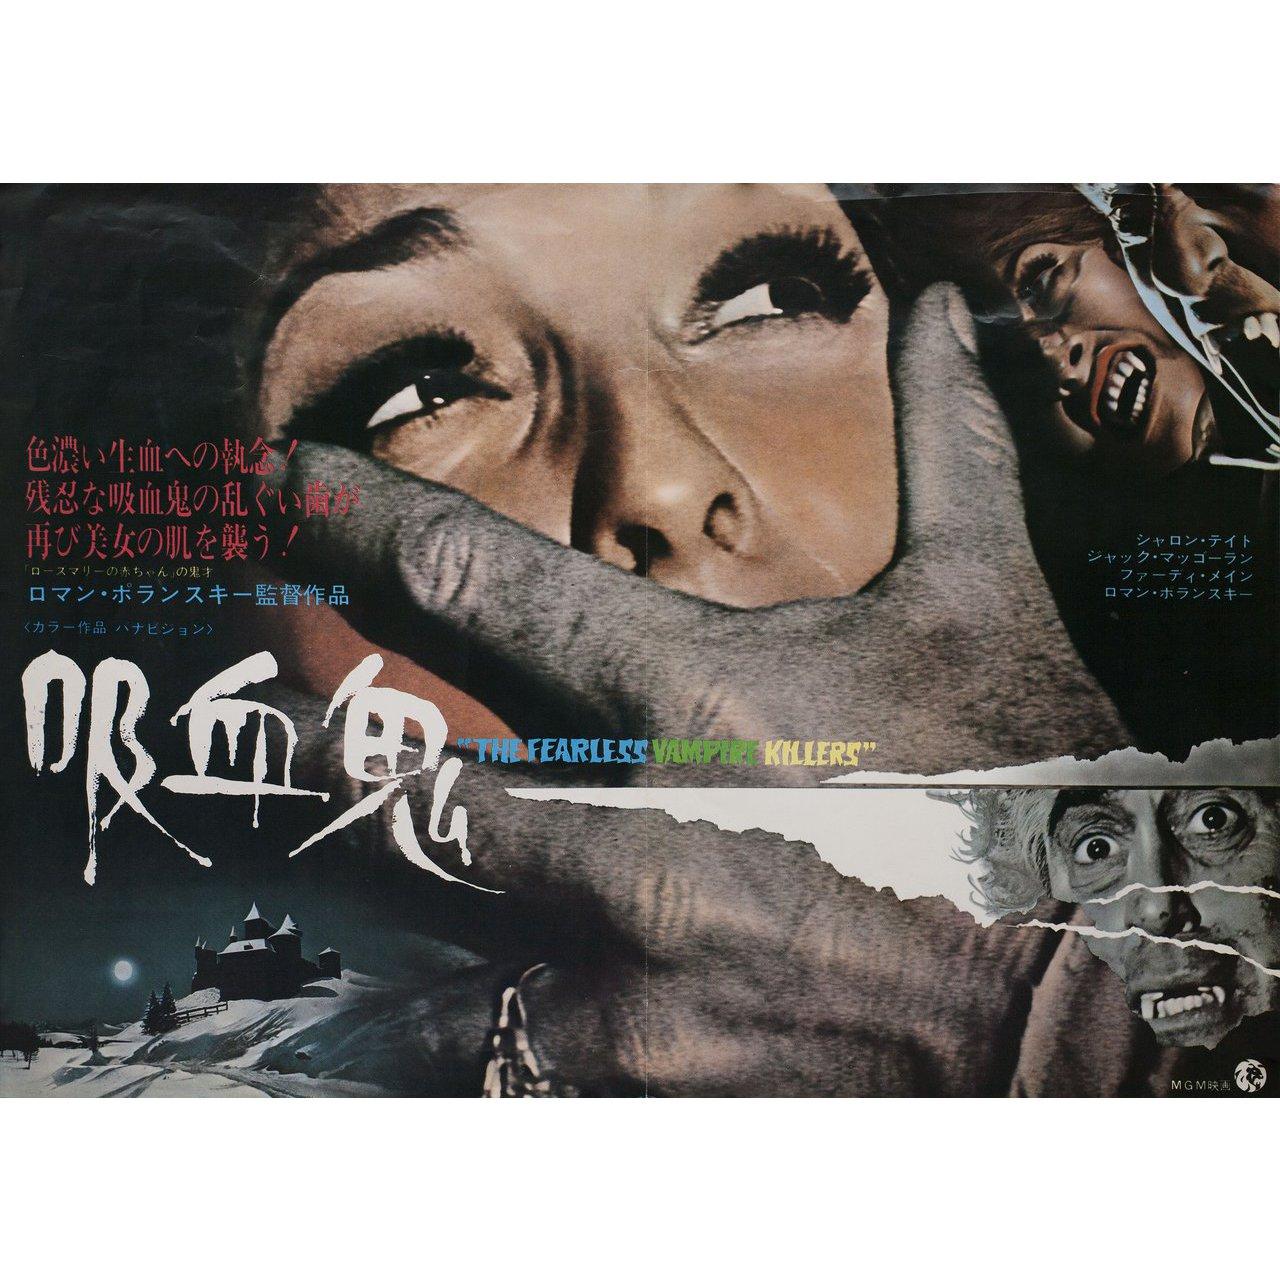 Original 1969 Japanese B3 poster for the first Japanese theatrical release of the film The Fearless Vampire Killers directed by Roman Polanski with Jack MacGowran / Roman Polanski / Alfie Bass / Jessie Robins. Very Good-Fine condition, folded. Many